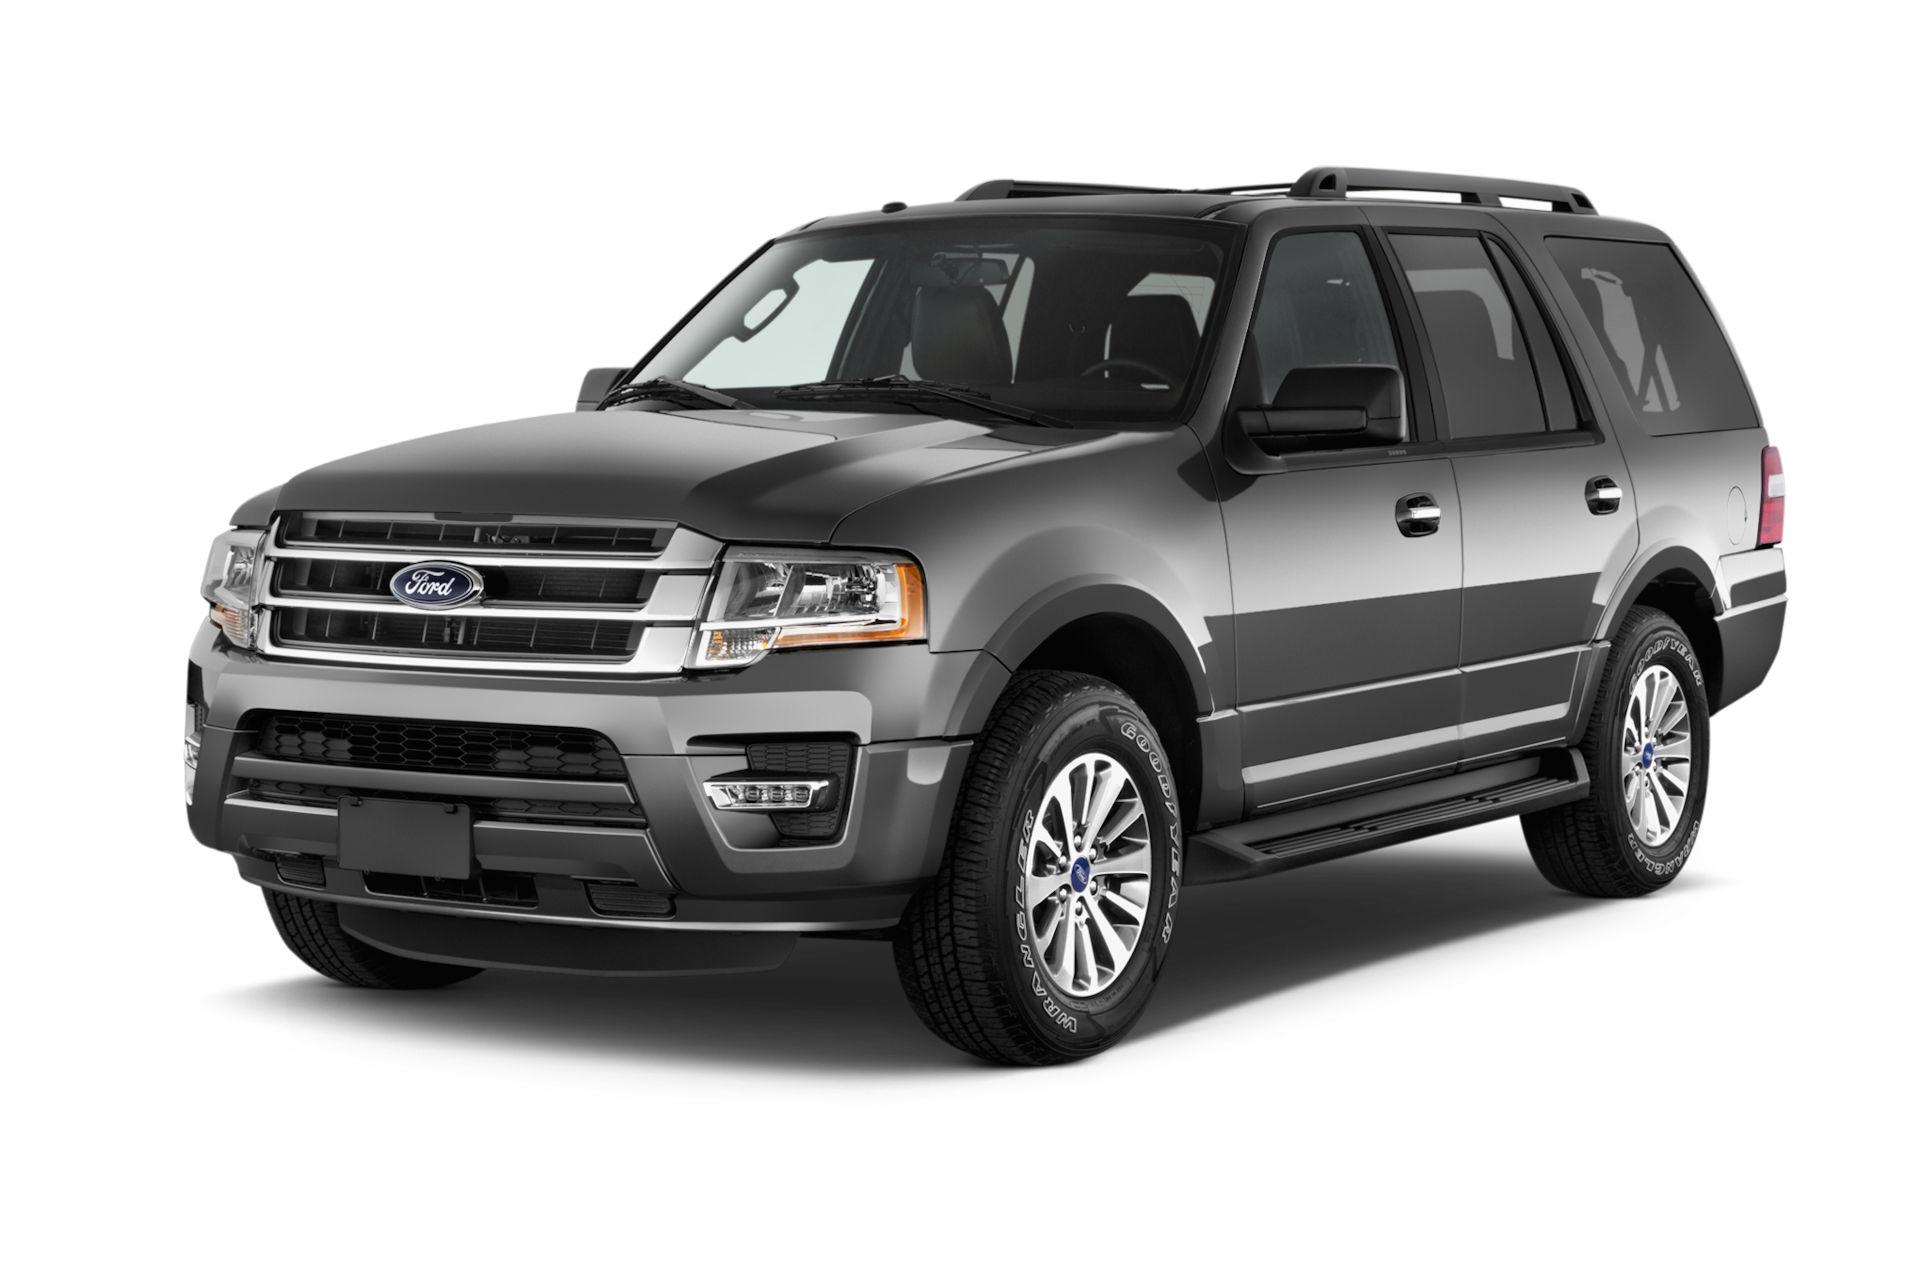 2015 Ford Expedition Prices, Reviews, and Photos - MotorTrend